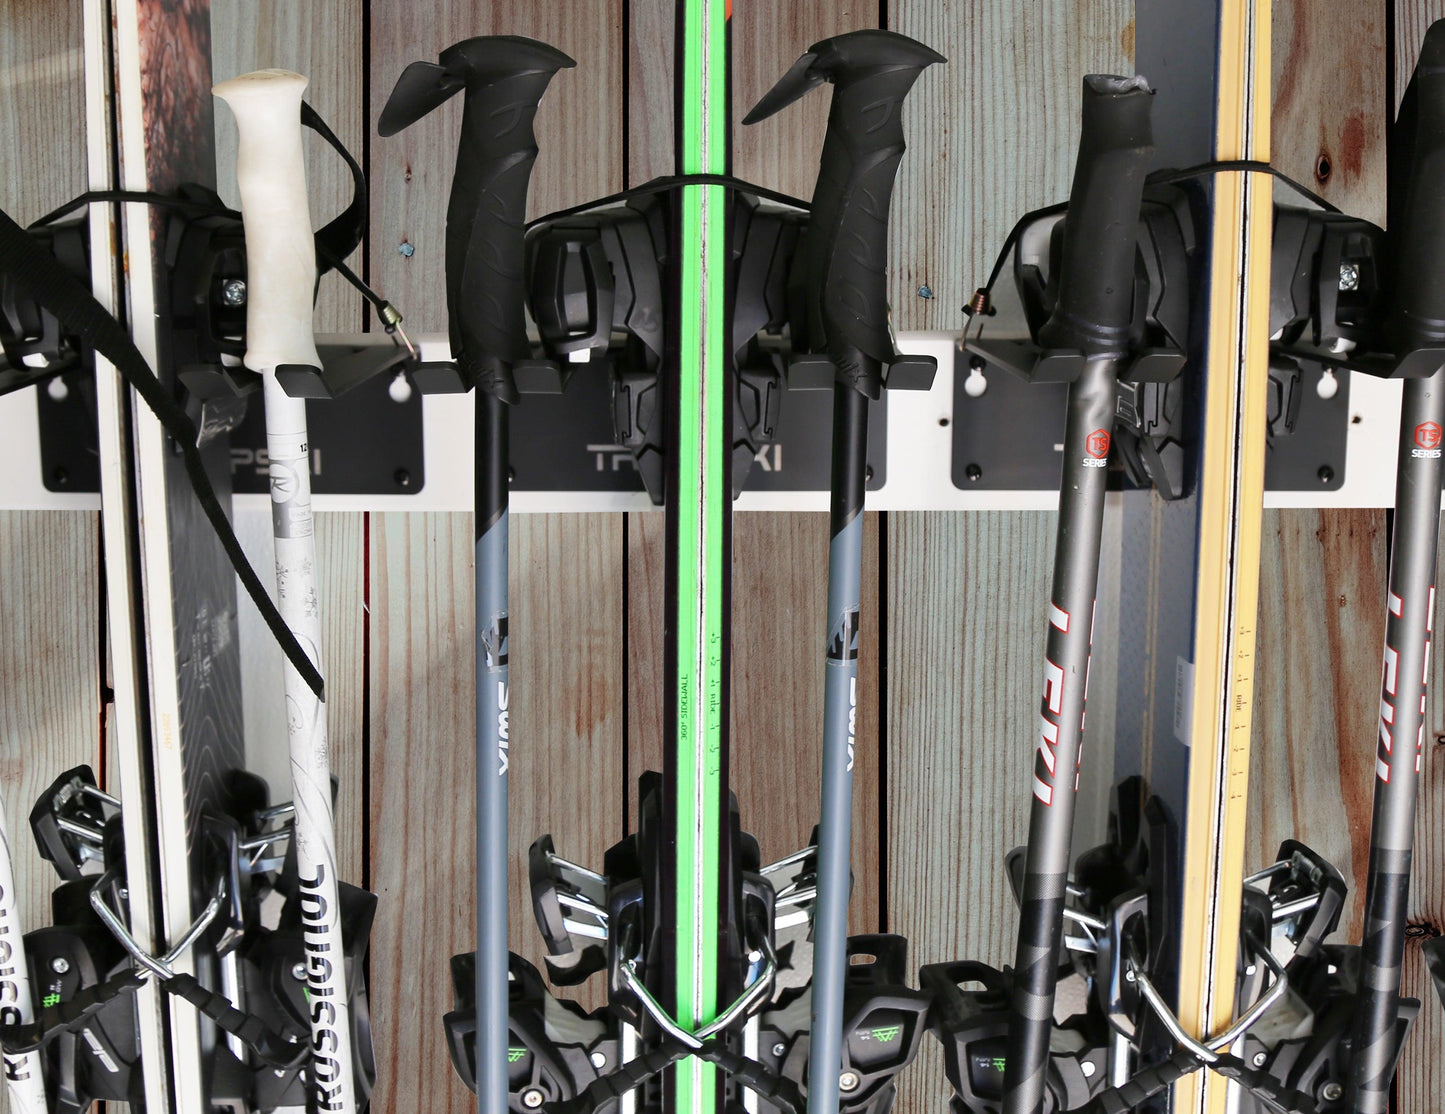 TRAPAWAY Wall Rack | Holds Skis or Snowboard by Bindings | Garage Organizer for Yard Tools, Gear & Equipment | Aluminum | No Moving Parts to break or pinch | Made in the USA